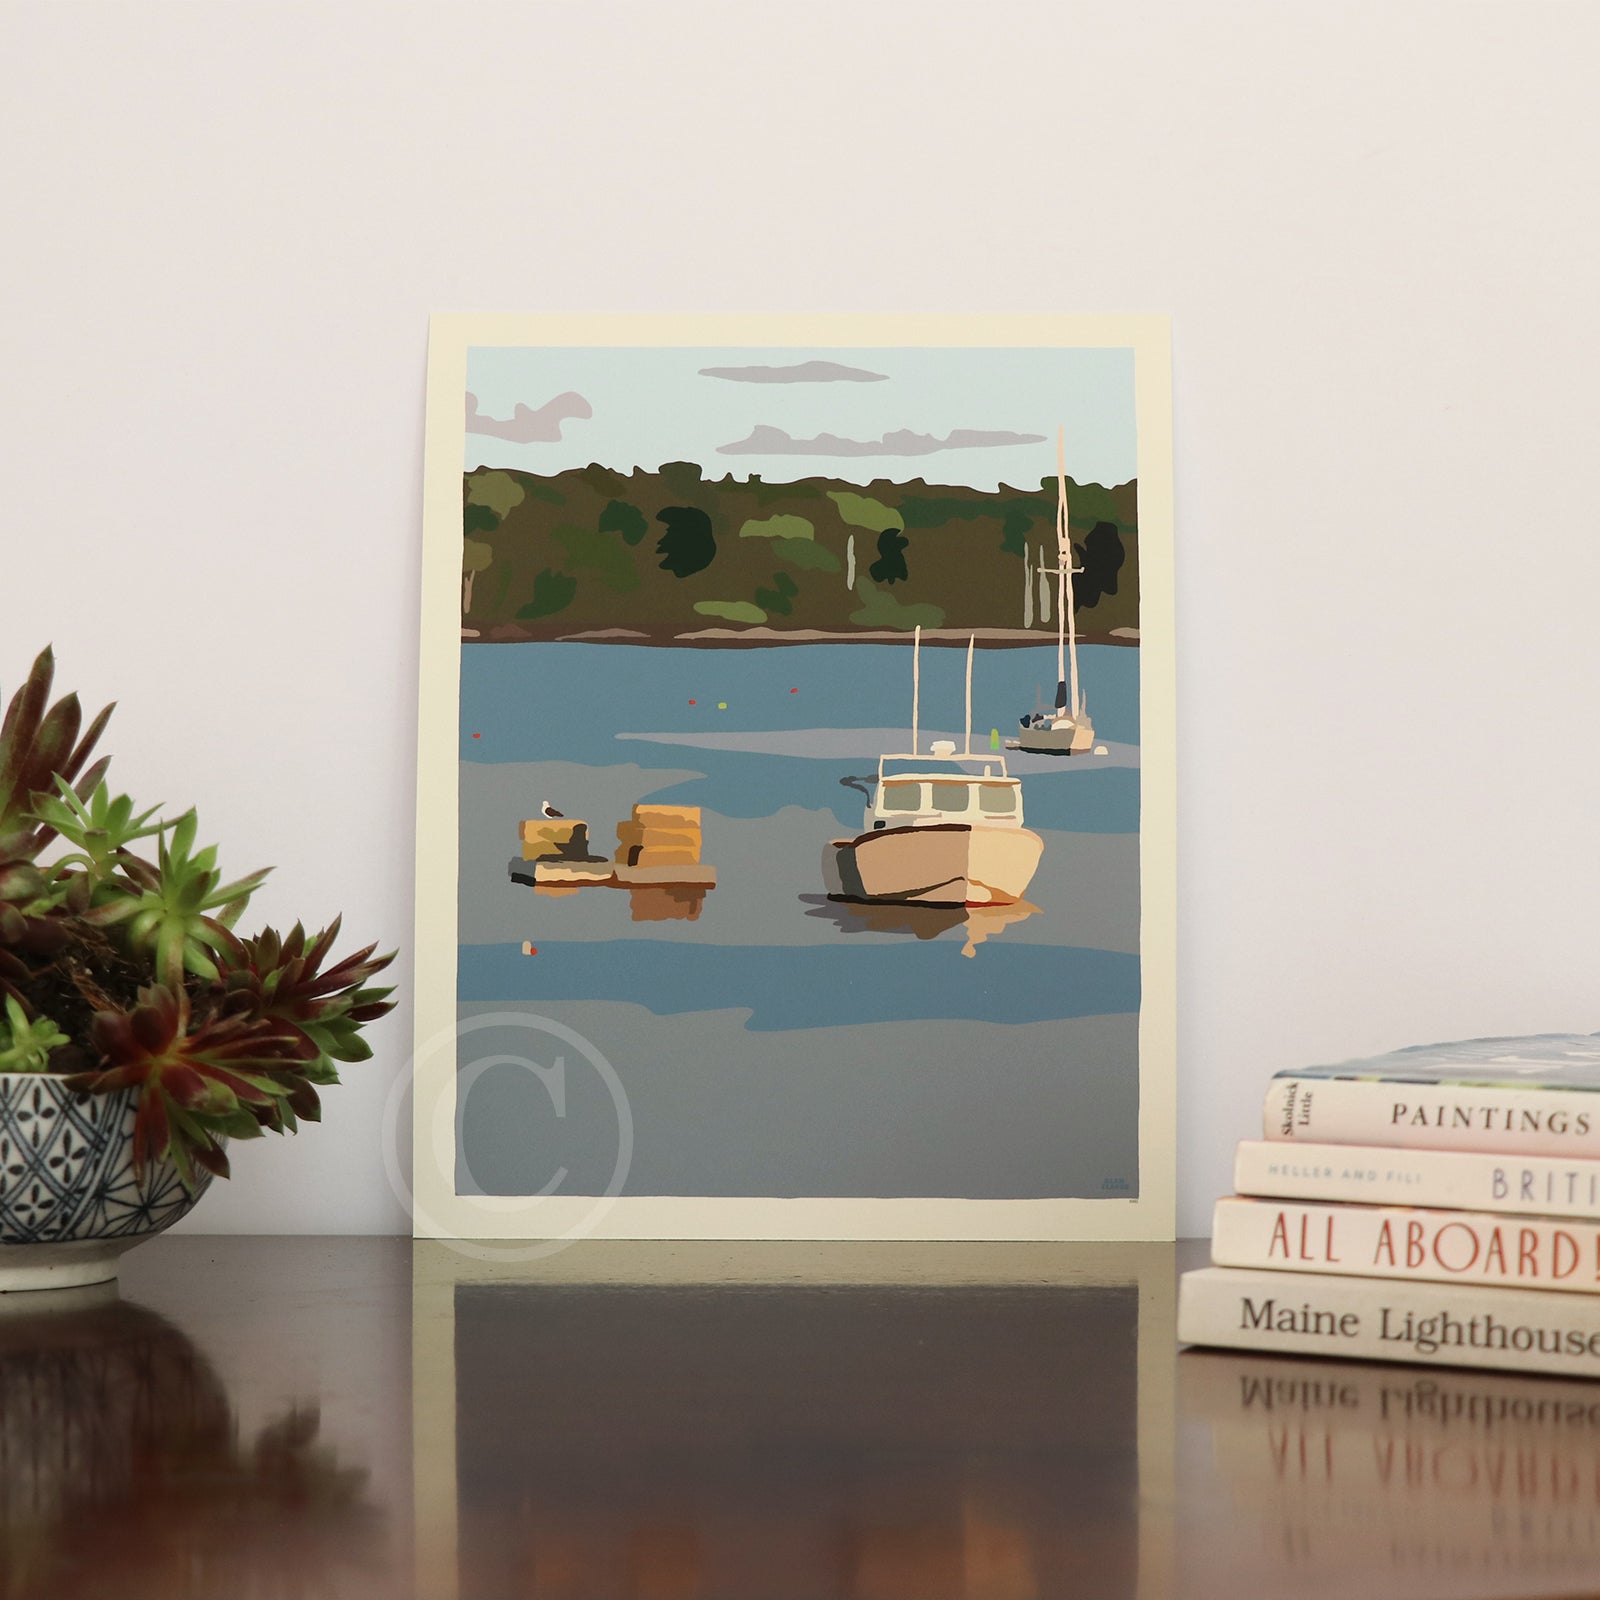 Lobster Boat in Round Pond Harbor Art Print 8" x 10” Vertical Wall Poster By Alan Claude - Maine